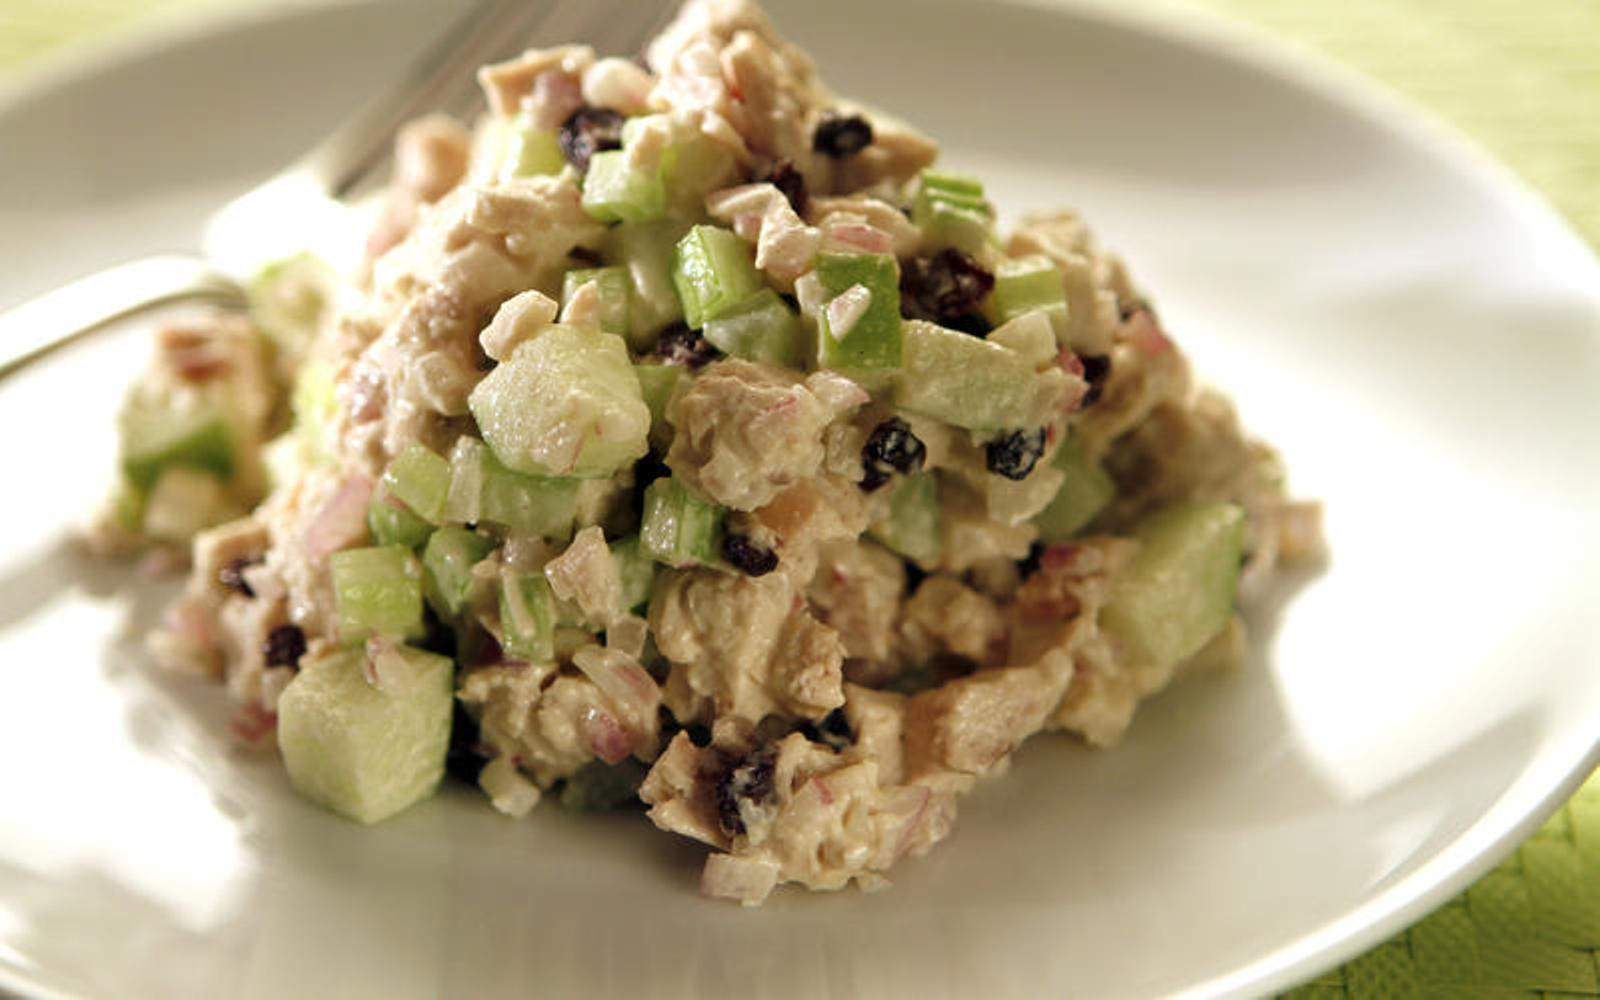 Chicken Salad Recipe With Apples
 Keep it simple with this green apple chicken salad recipe